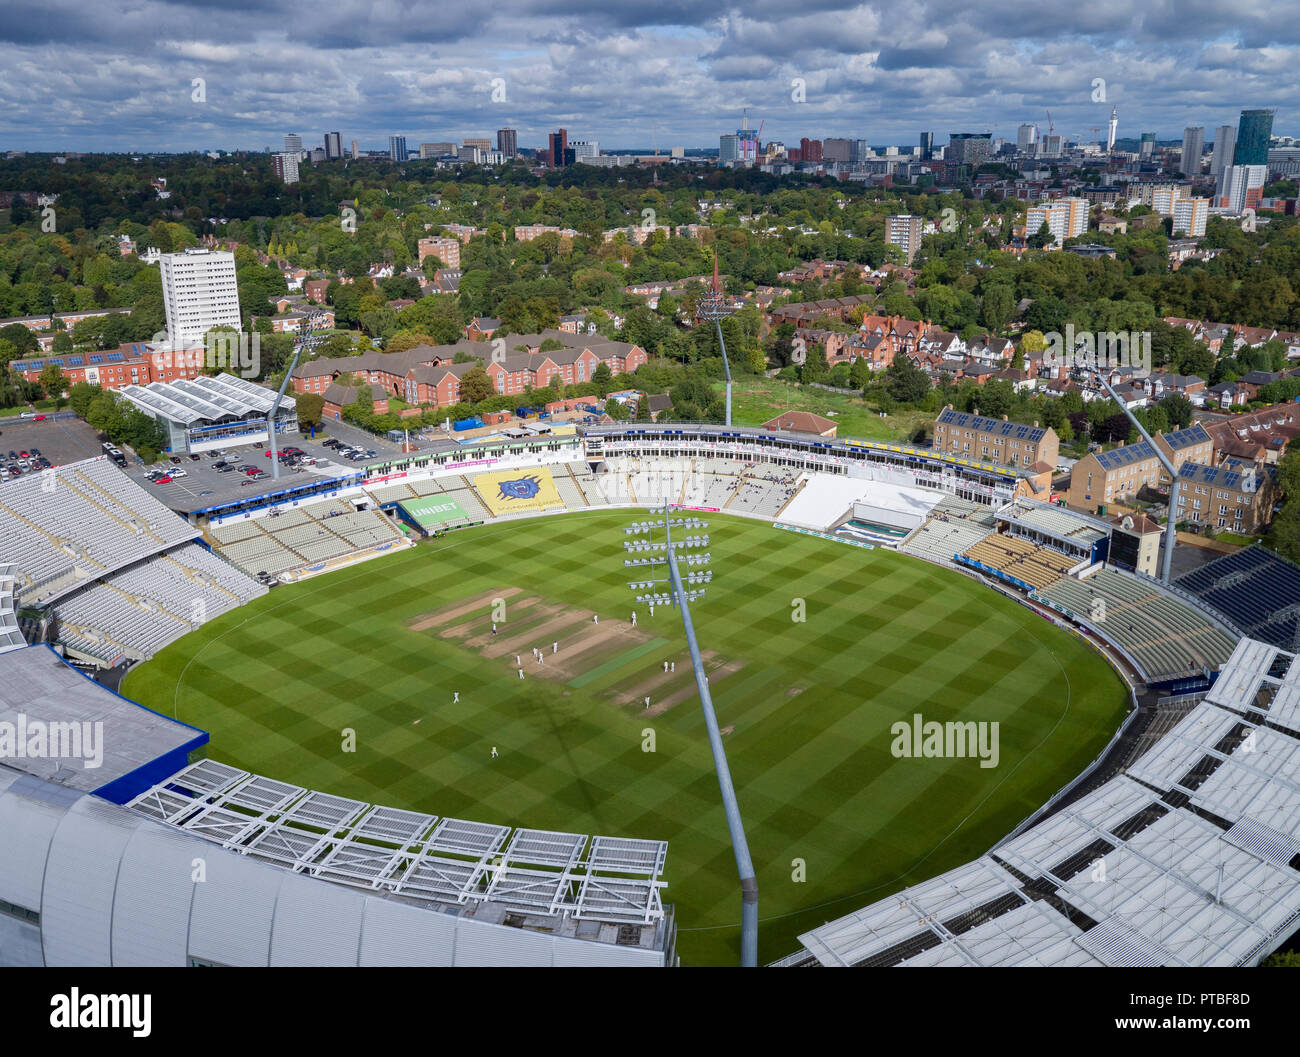 An aerial view of Edgbaston Cricket Club ground, home of Warwickshire County Cricket Club showing the Birmingham City Centre skyline. Stock Photo